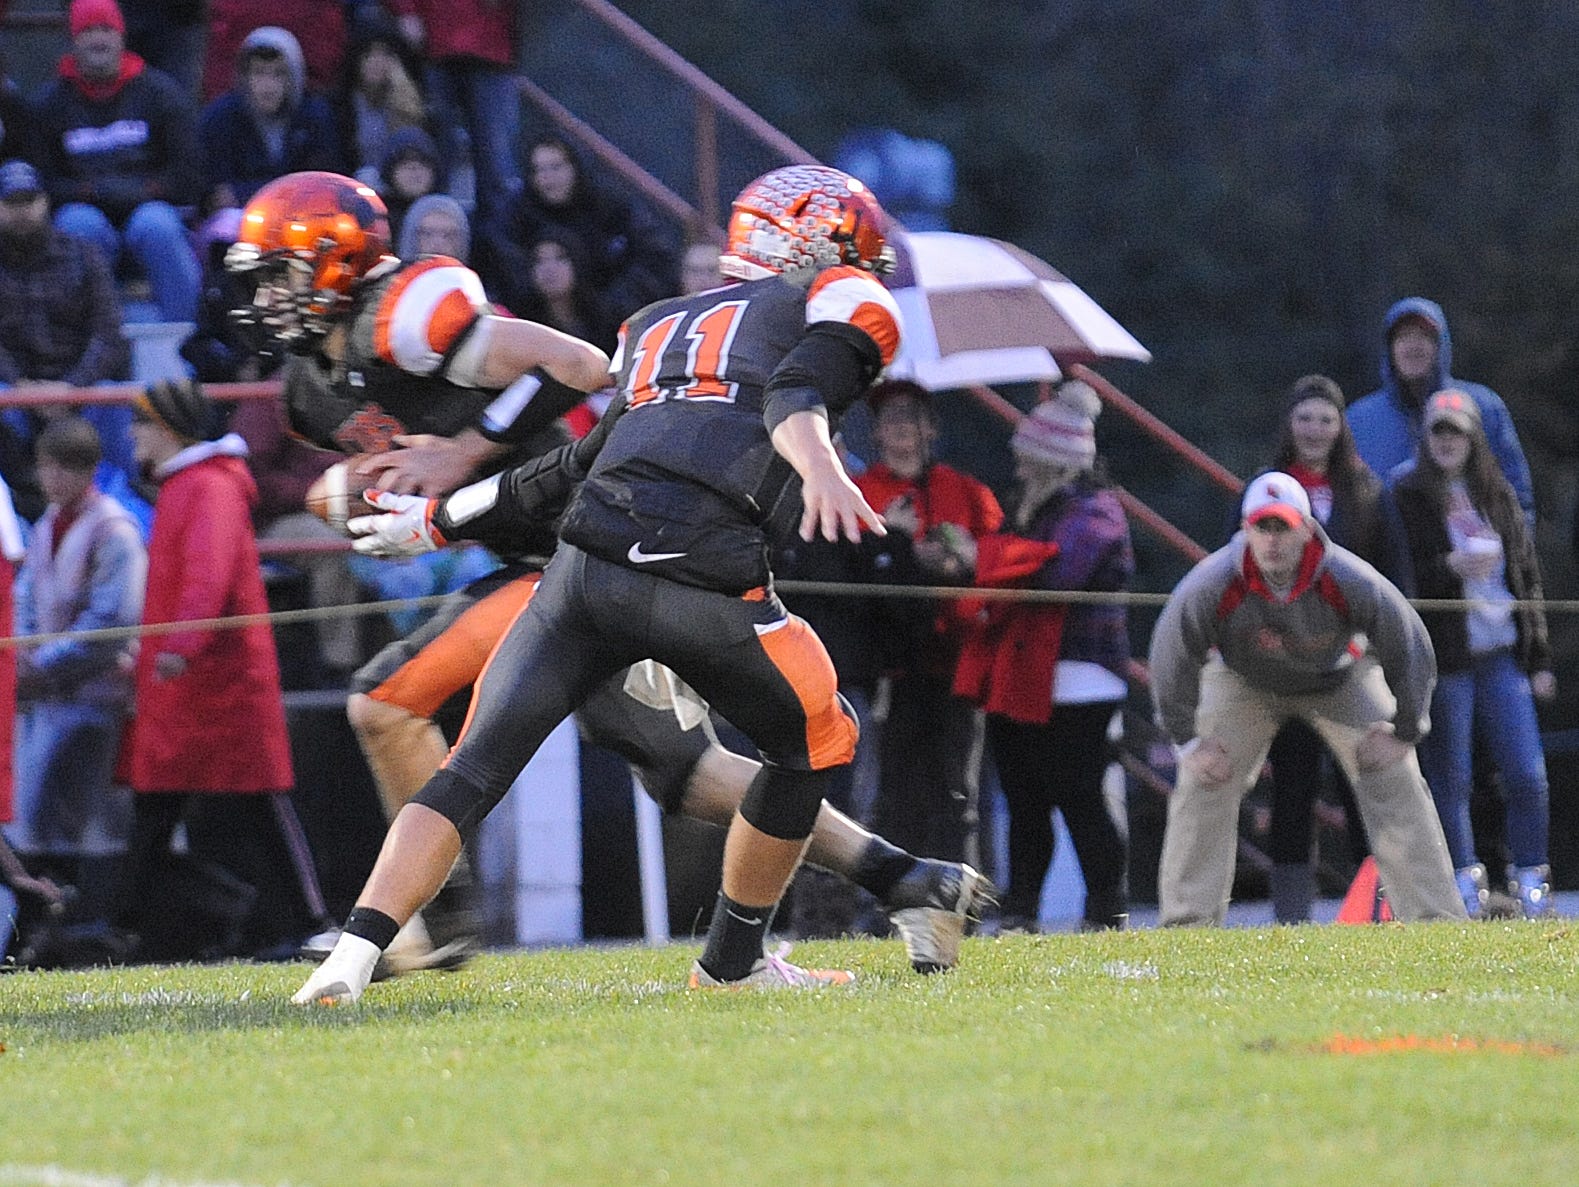 Lucas quarterback Rueben Luna hands off to running back Mason Galco against Loudonville. For the second straight year, the Cubs are in the playoffs and they will host a game Friday night at 7:30 p.m.